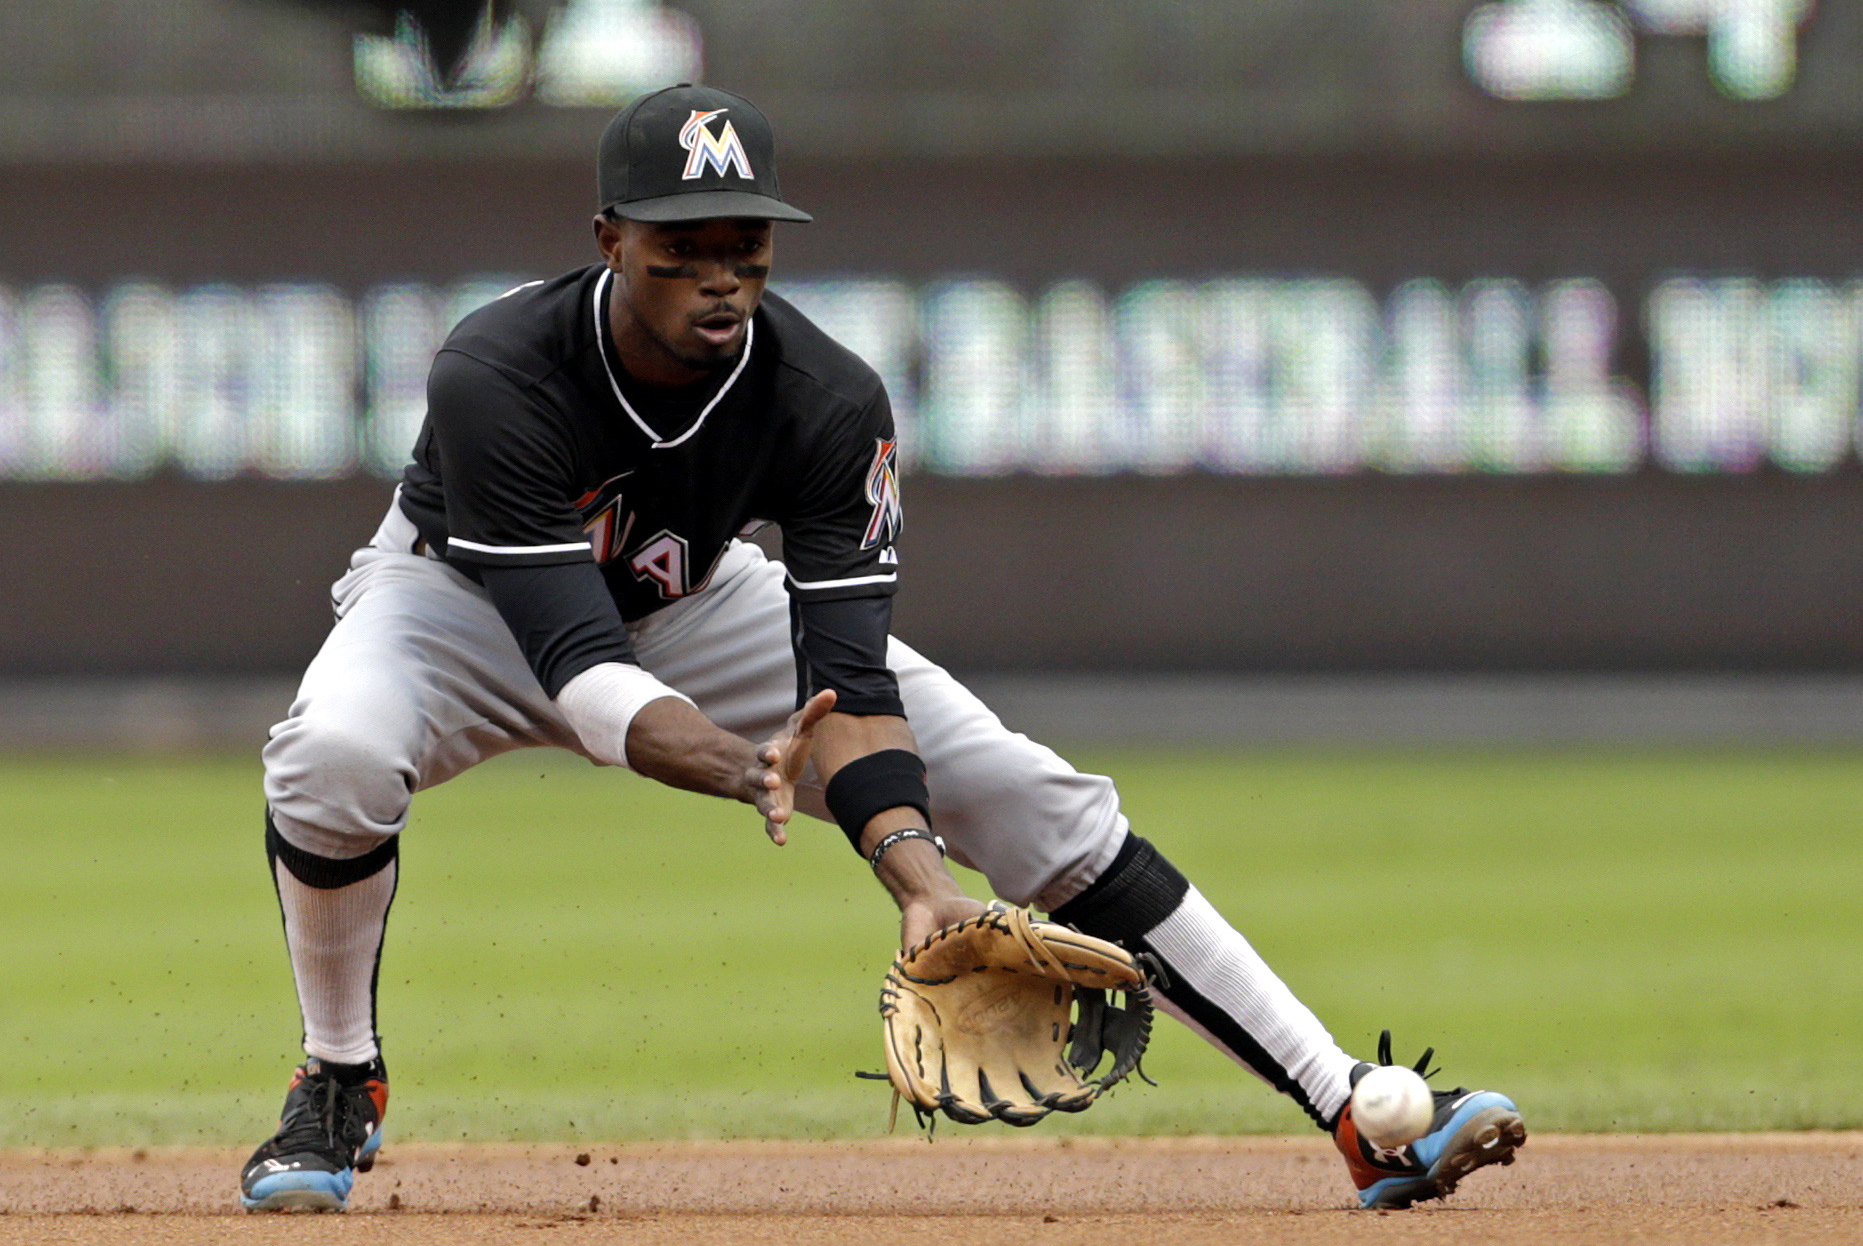 Dee Gordon and the red hot Marlins come to Nats Park - Federal Baseball